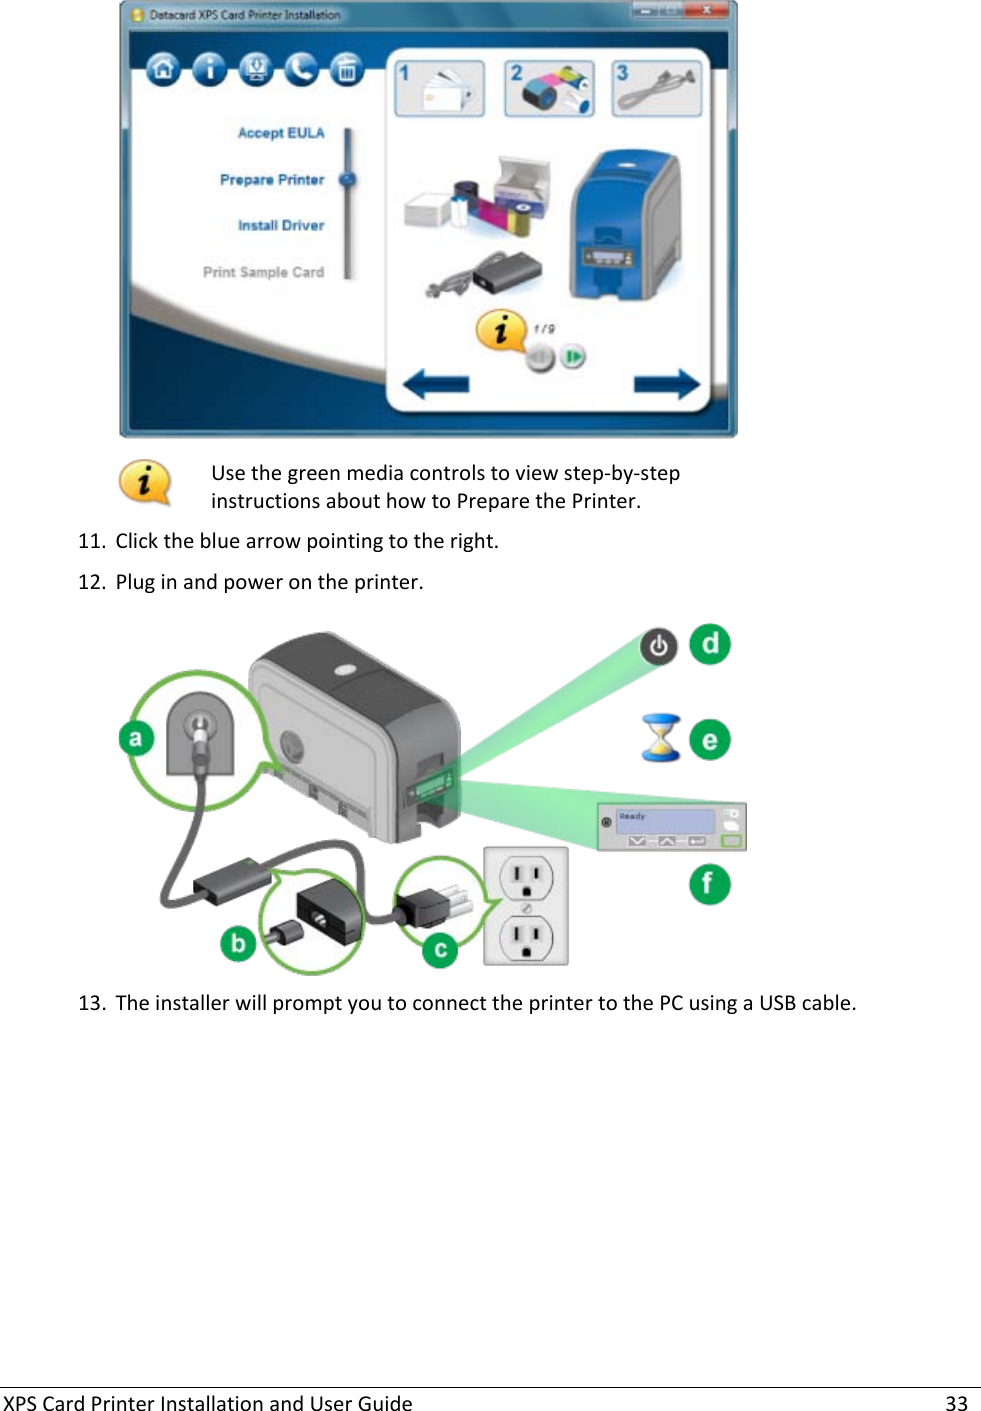 XPS Card Printer Installation and User Guide    33   Use the green media controls to view step-by-step instructions about how to Prepare the Printer. 11. Click the blue arrow pointing to the right.  12. Plug in and power on the printer.    13. The installer will prompt you to connect the printer to the PC using a USB cable.  